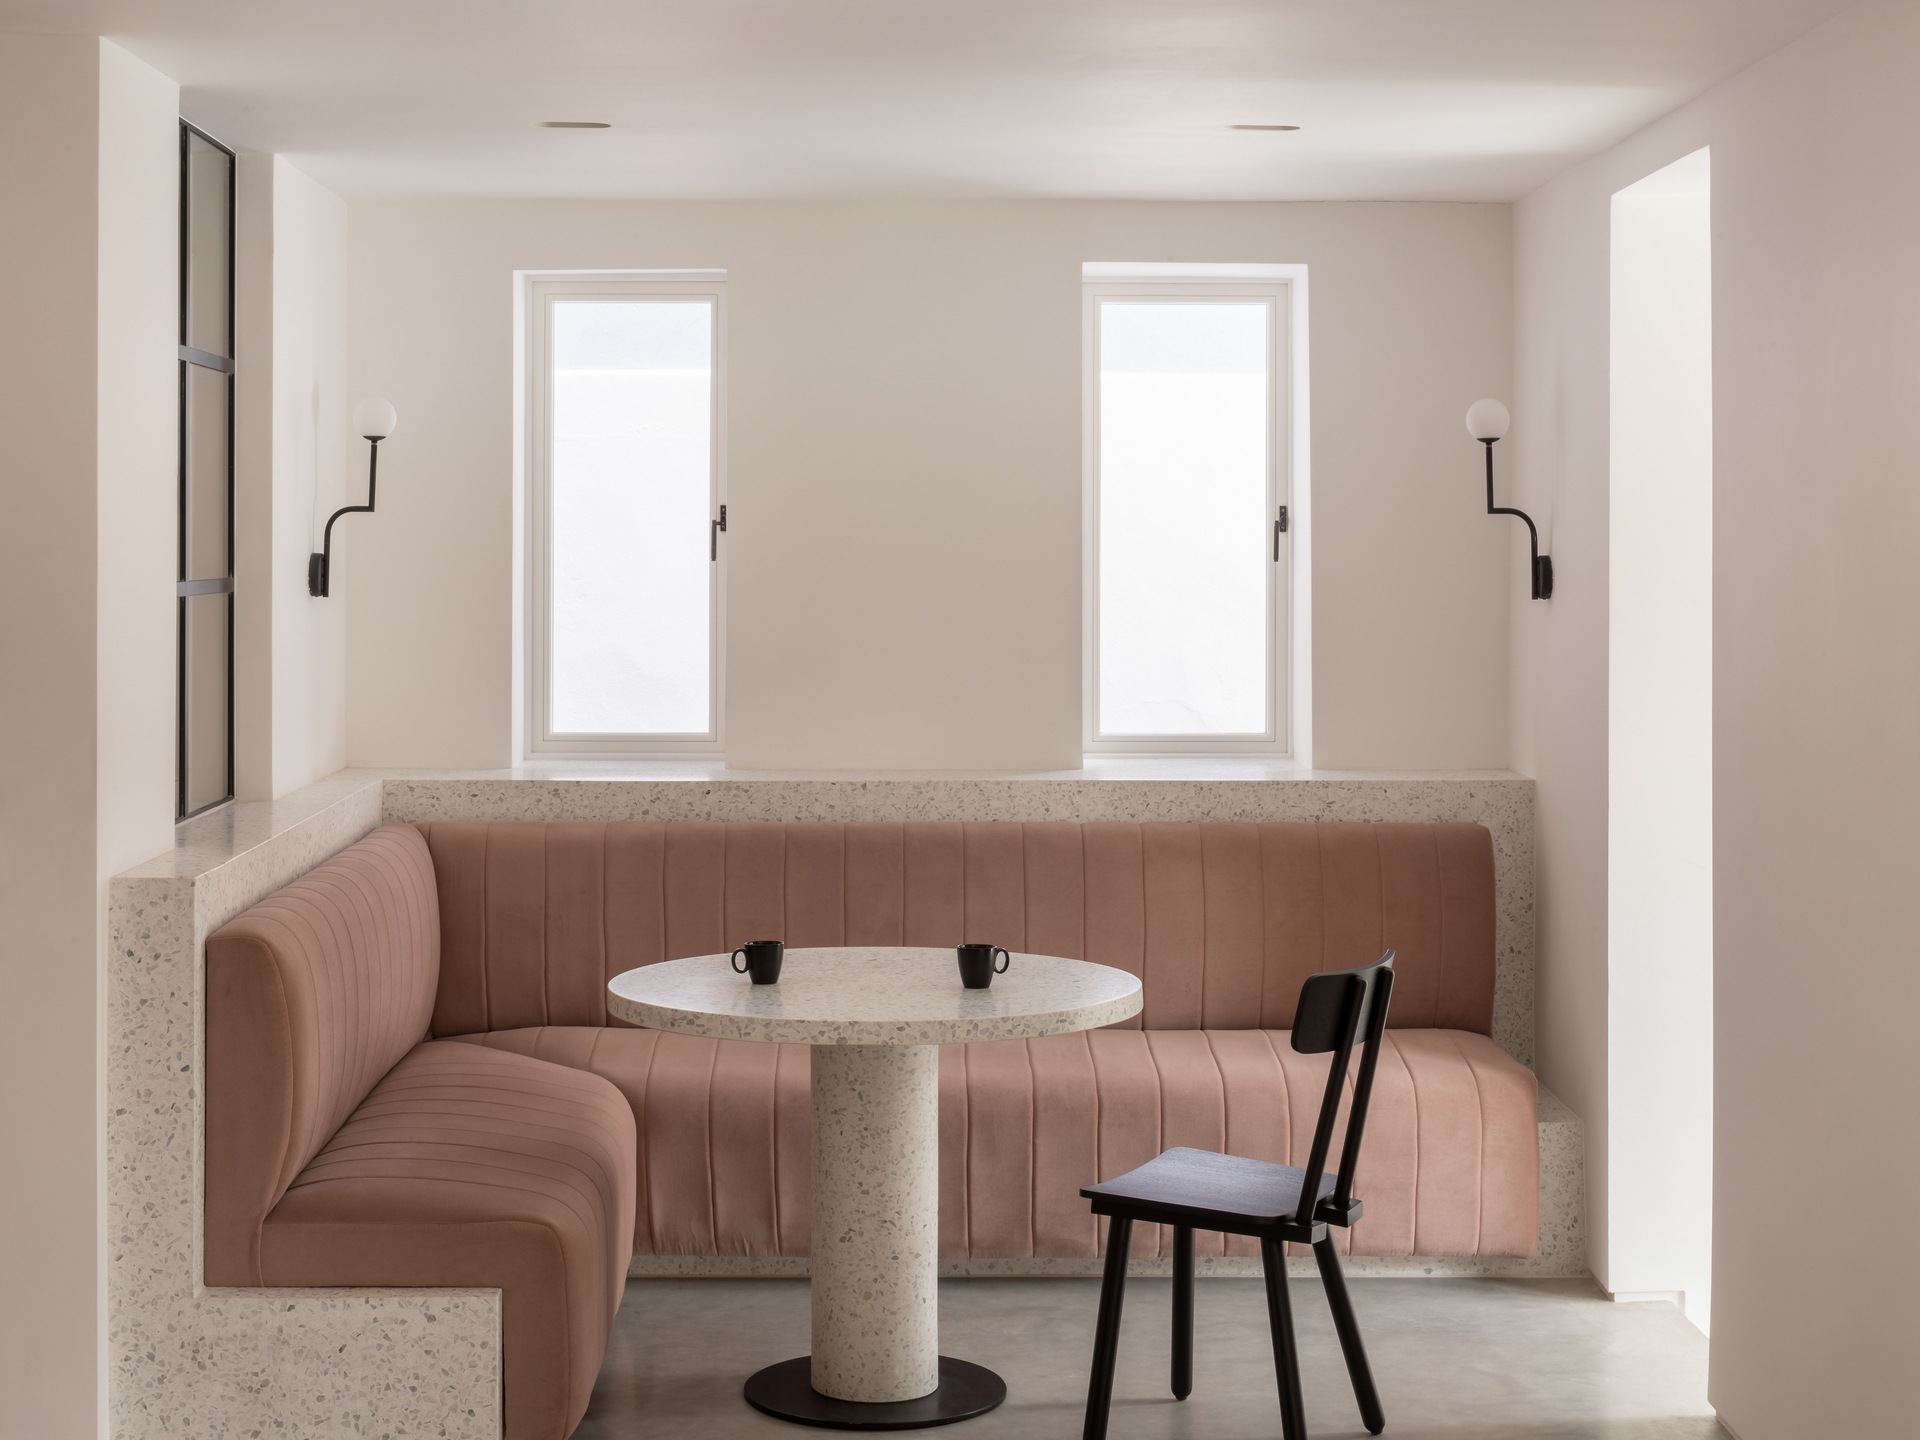 A diner-inspired seating area with pink upholstery